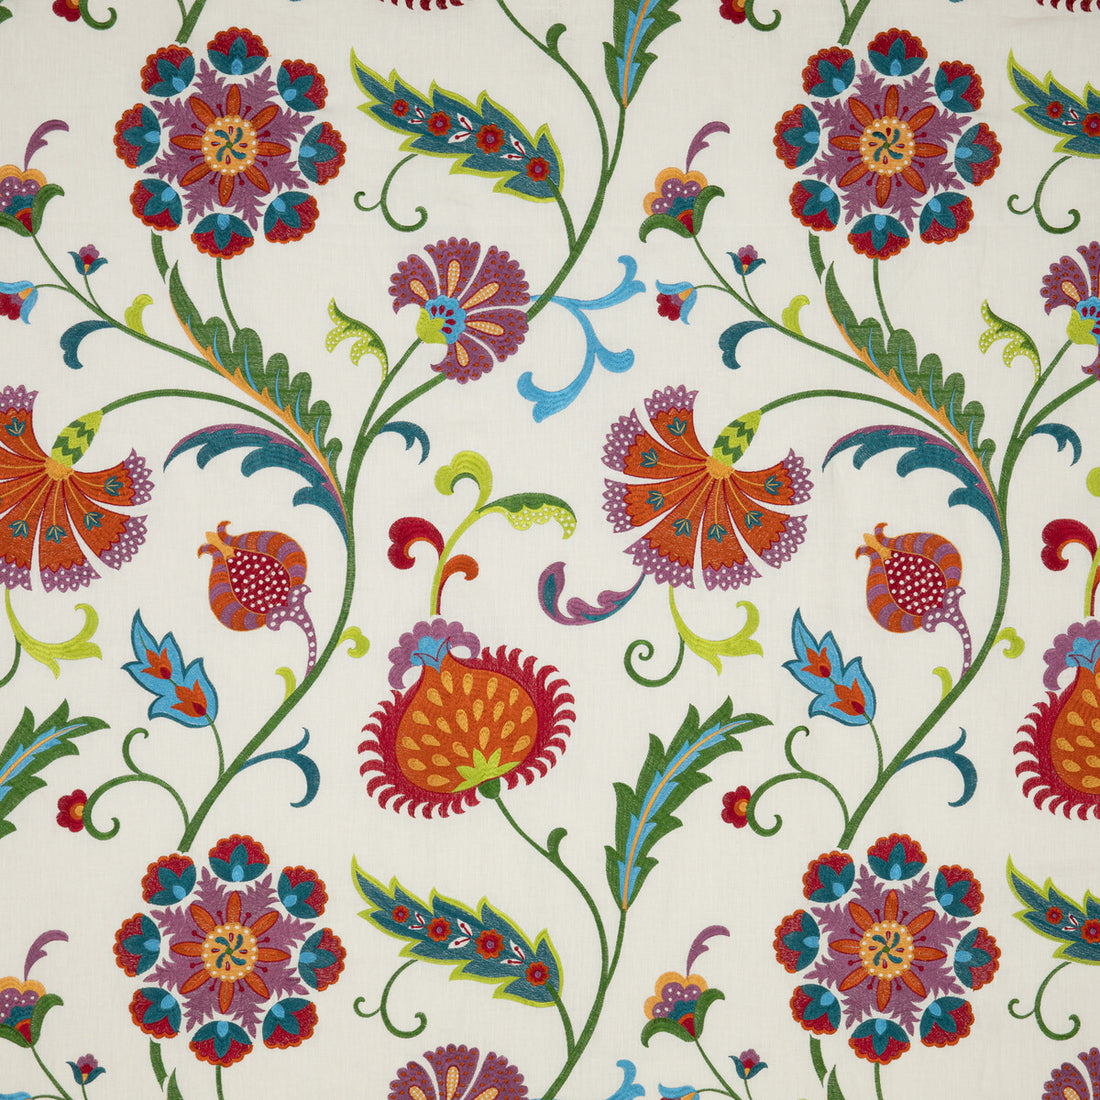 Blooming Marvellous fabric in multi color - pattern PF50468.1.0 - by Baker Lifestyle in the Fiesta collection